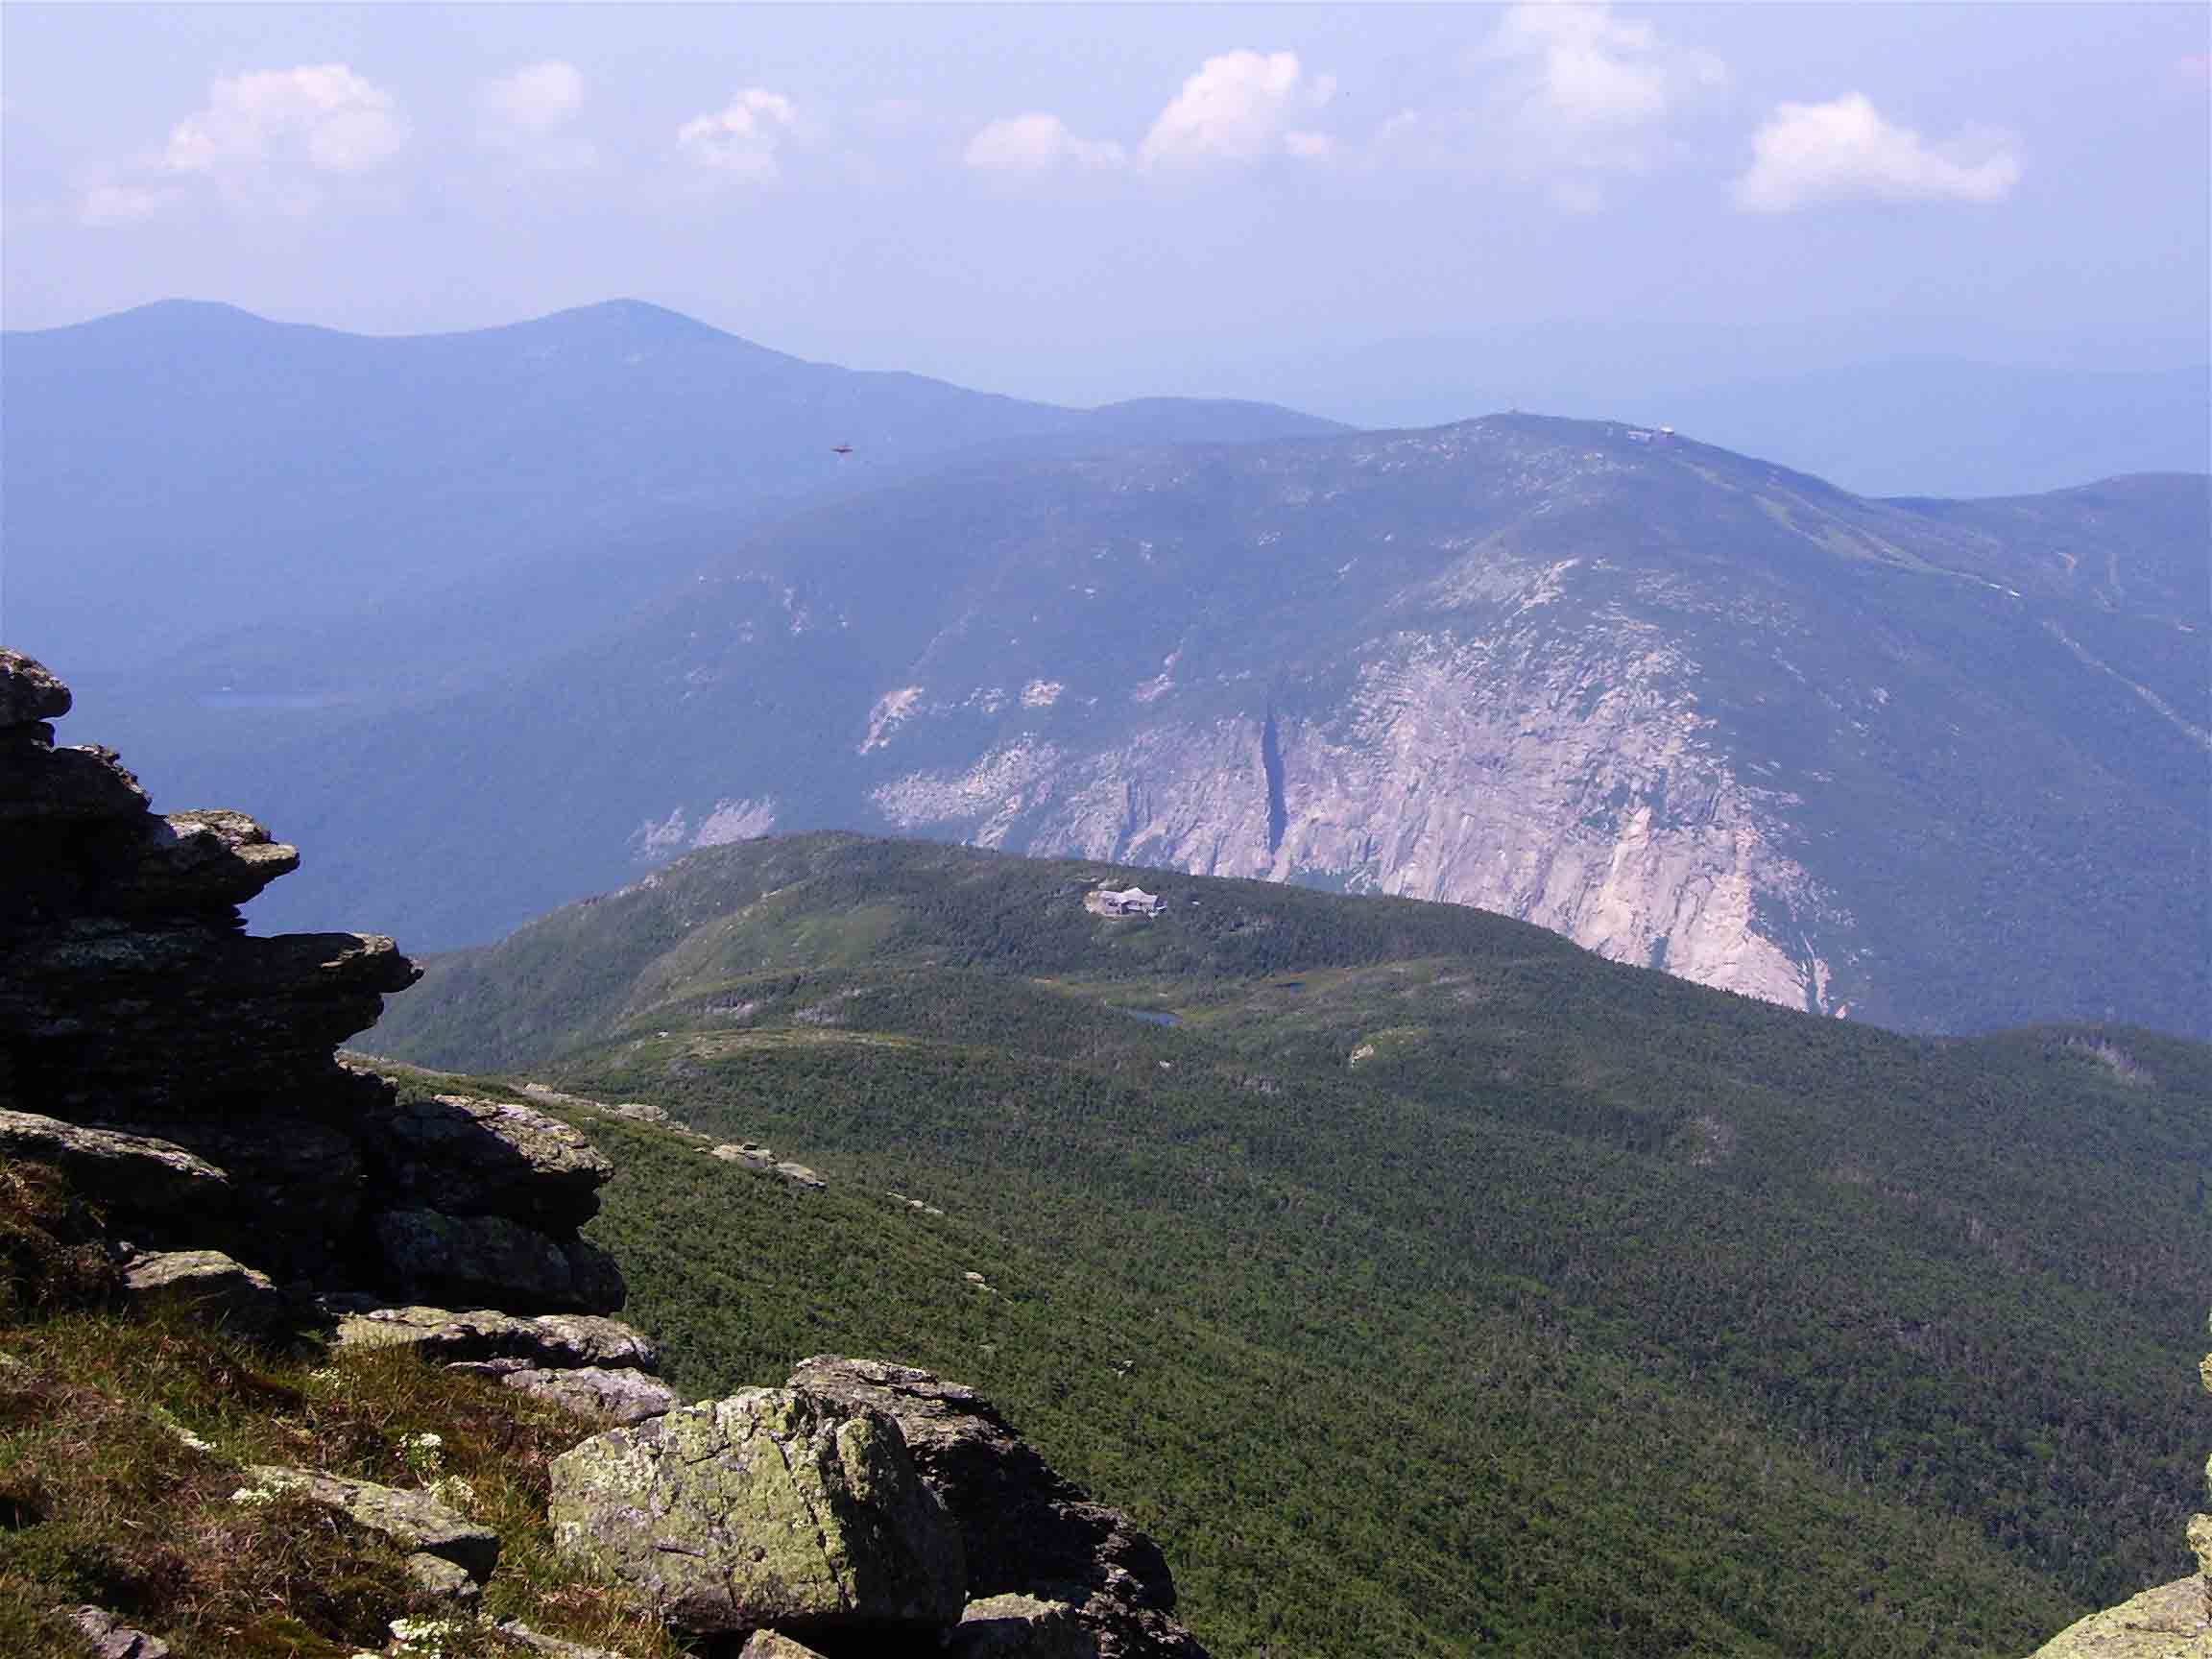 mm 21.3 - View to the west from the ridge of Mt. Lafayette. Greenleaf Hut (not on AT) is in center of picture. The mountain with the spectacular cliff is Cannon Mt. on the other side of Franconia Notch. The two large peaks on the left in the distance are North and South Kinsman, both of which the AT crosses.  Courtesy dlcul@conncoll.edu